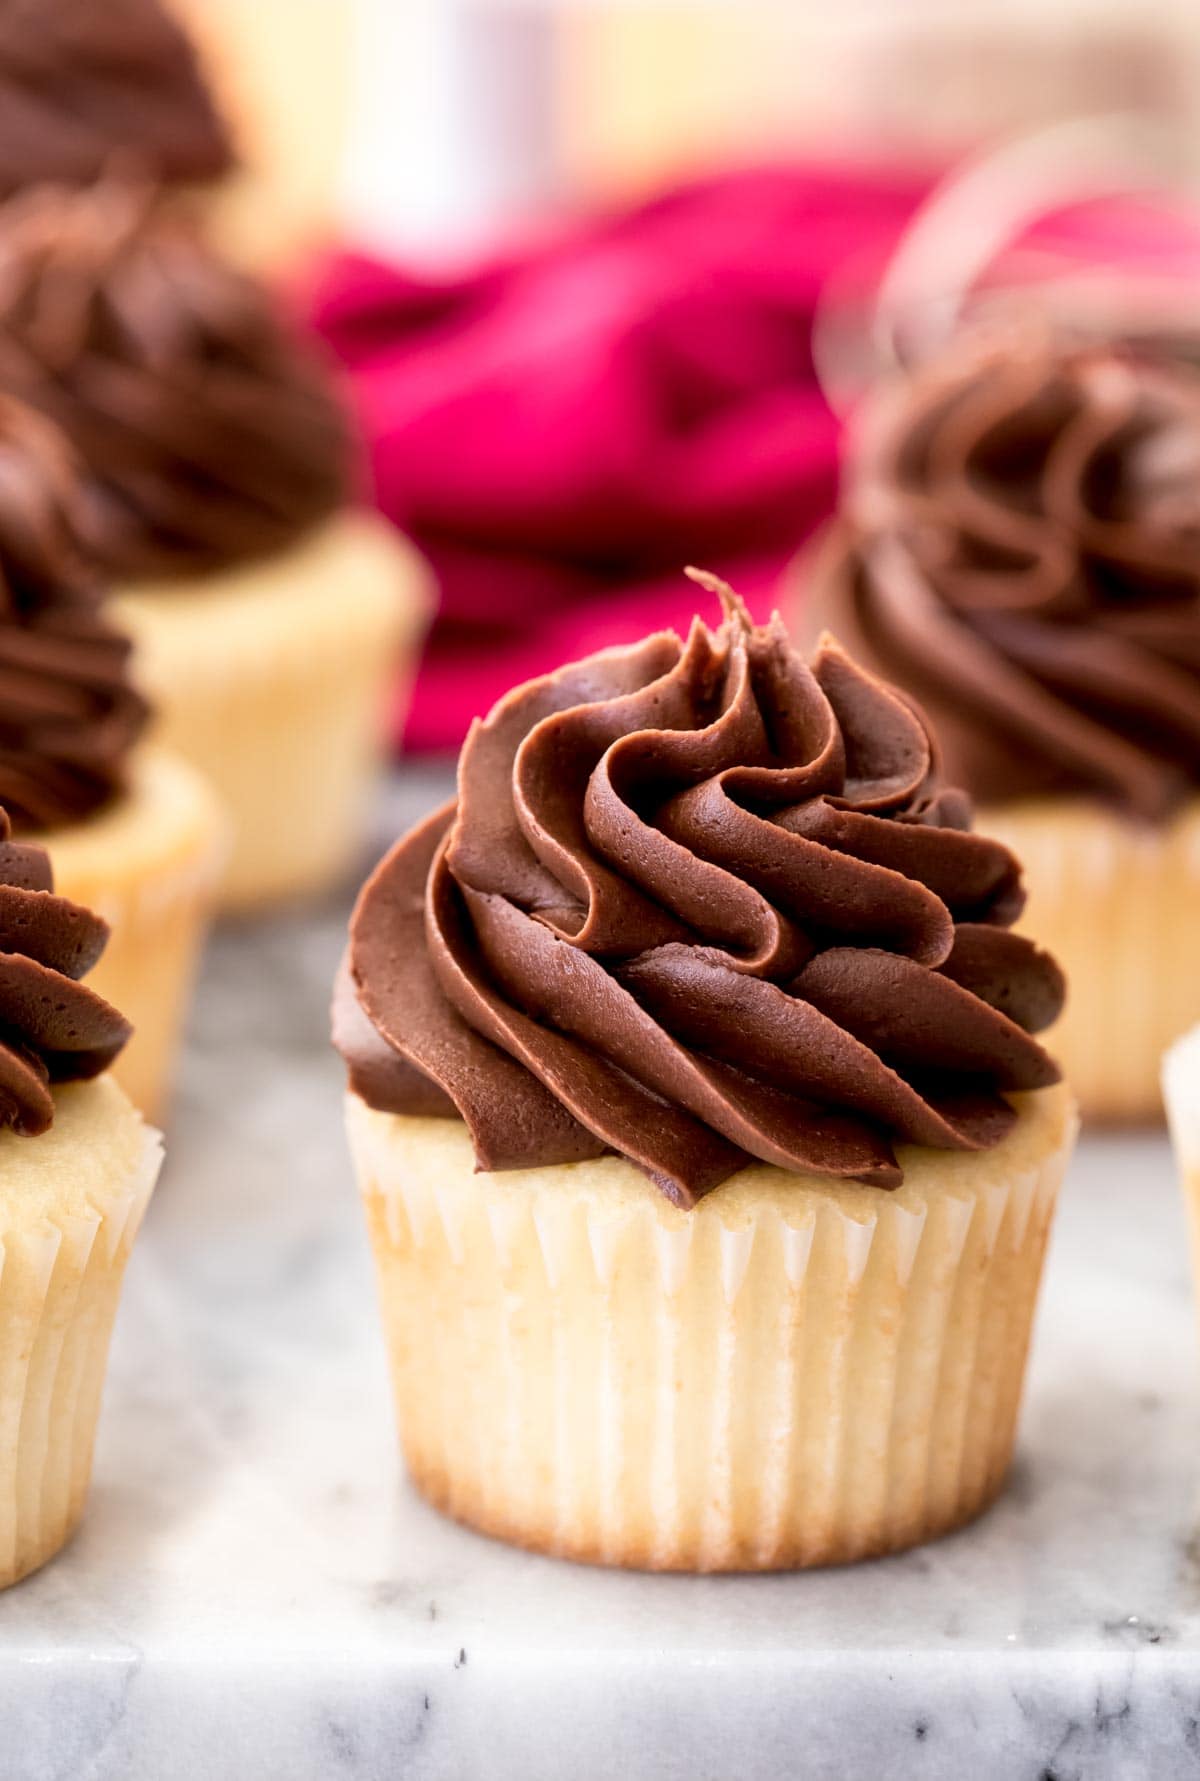 Vanilla cupcake with chocolate frosting 